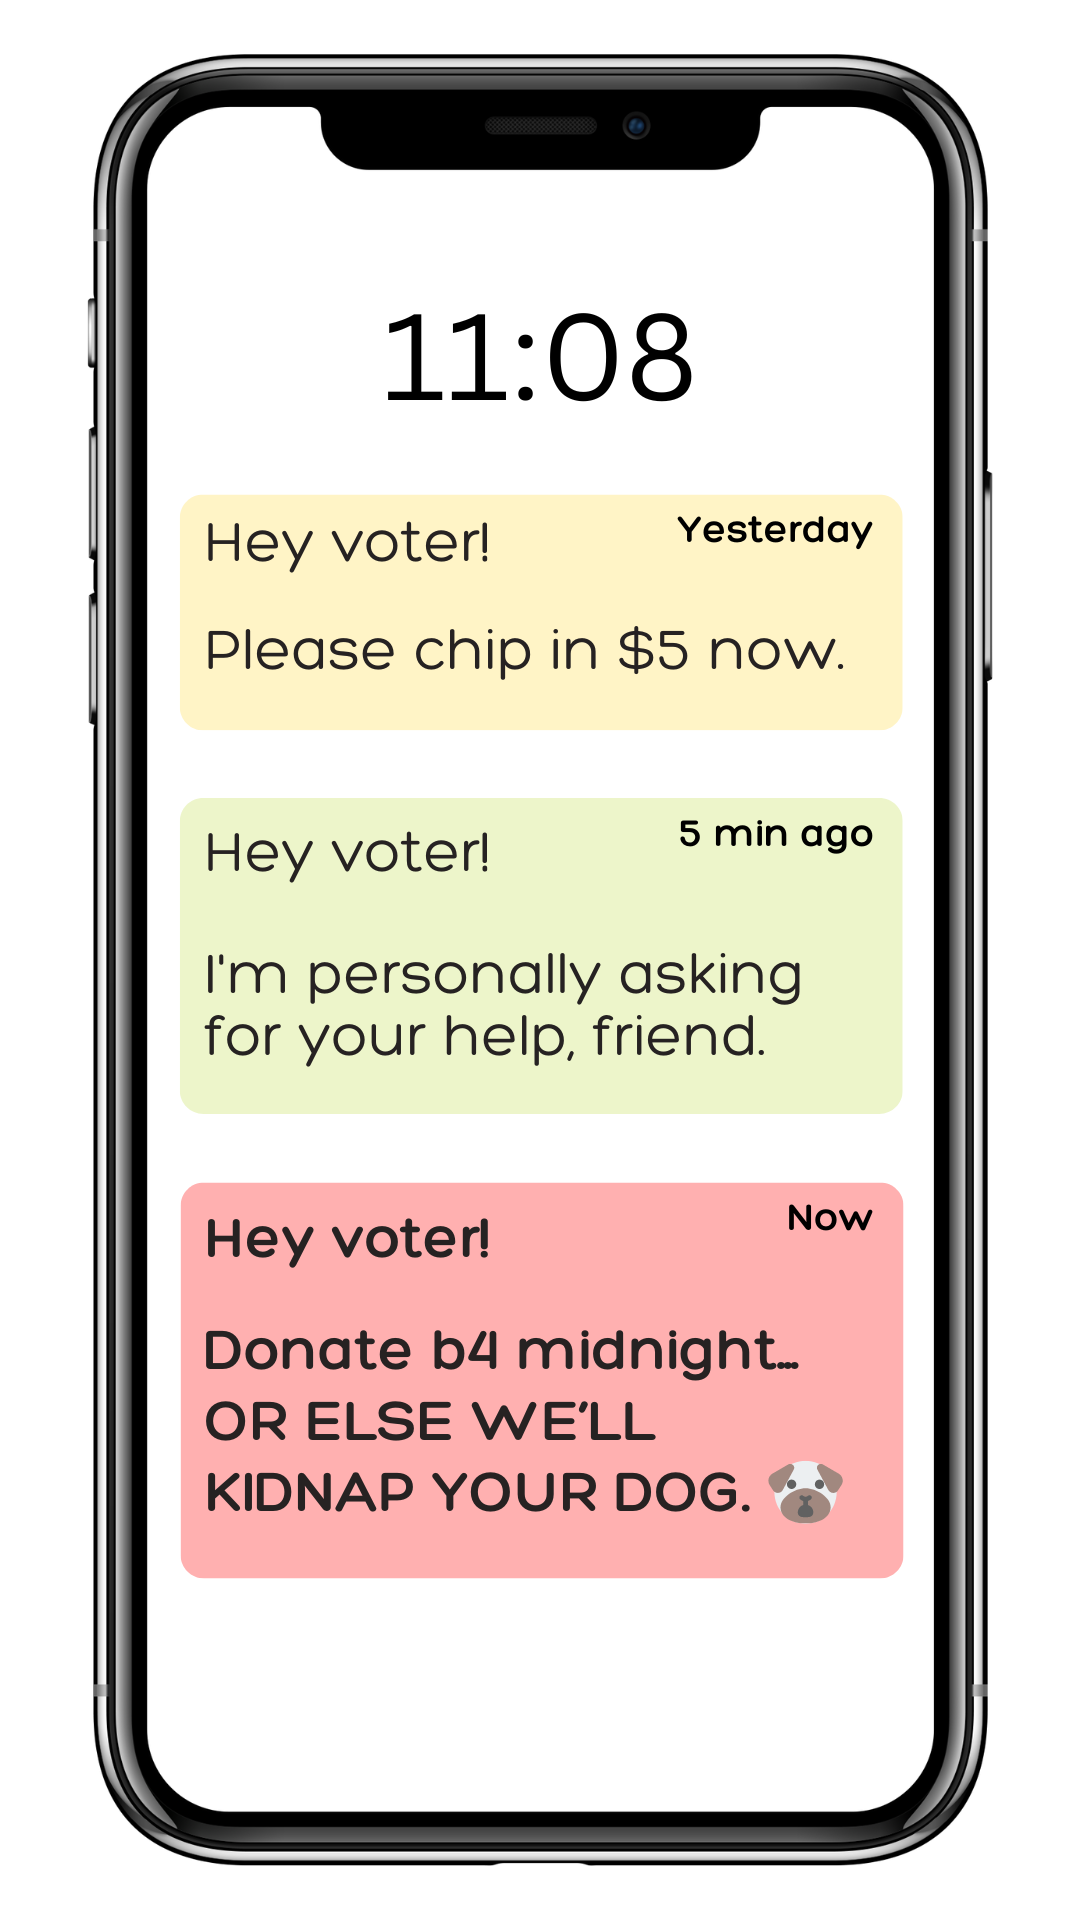 An image of a smart phone lock screen with three text notifications stacked vertically. The top text is colored yellow and reads "Yesterday: Hey voter! Please chip in $5 now." The middle text is colored green and reads, "5 min ago: Hey voter! I'm personally asking for your help, friend." The bottom text is colored red and reads, "Now: Hey voter! Donate b4 midnight... OR ELSE WE'LL KIDNAP YOUR DOG." with a surprised looking pug dog emoji at the end of the message. The time on the clock says 11:08.